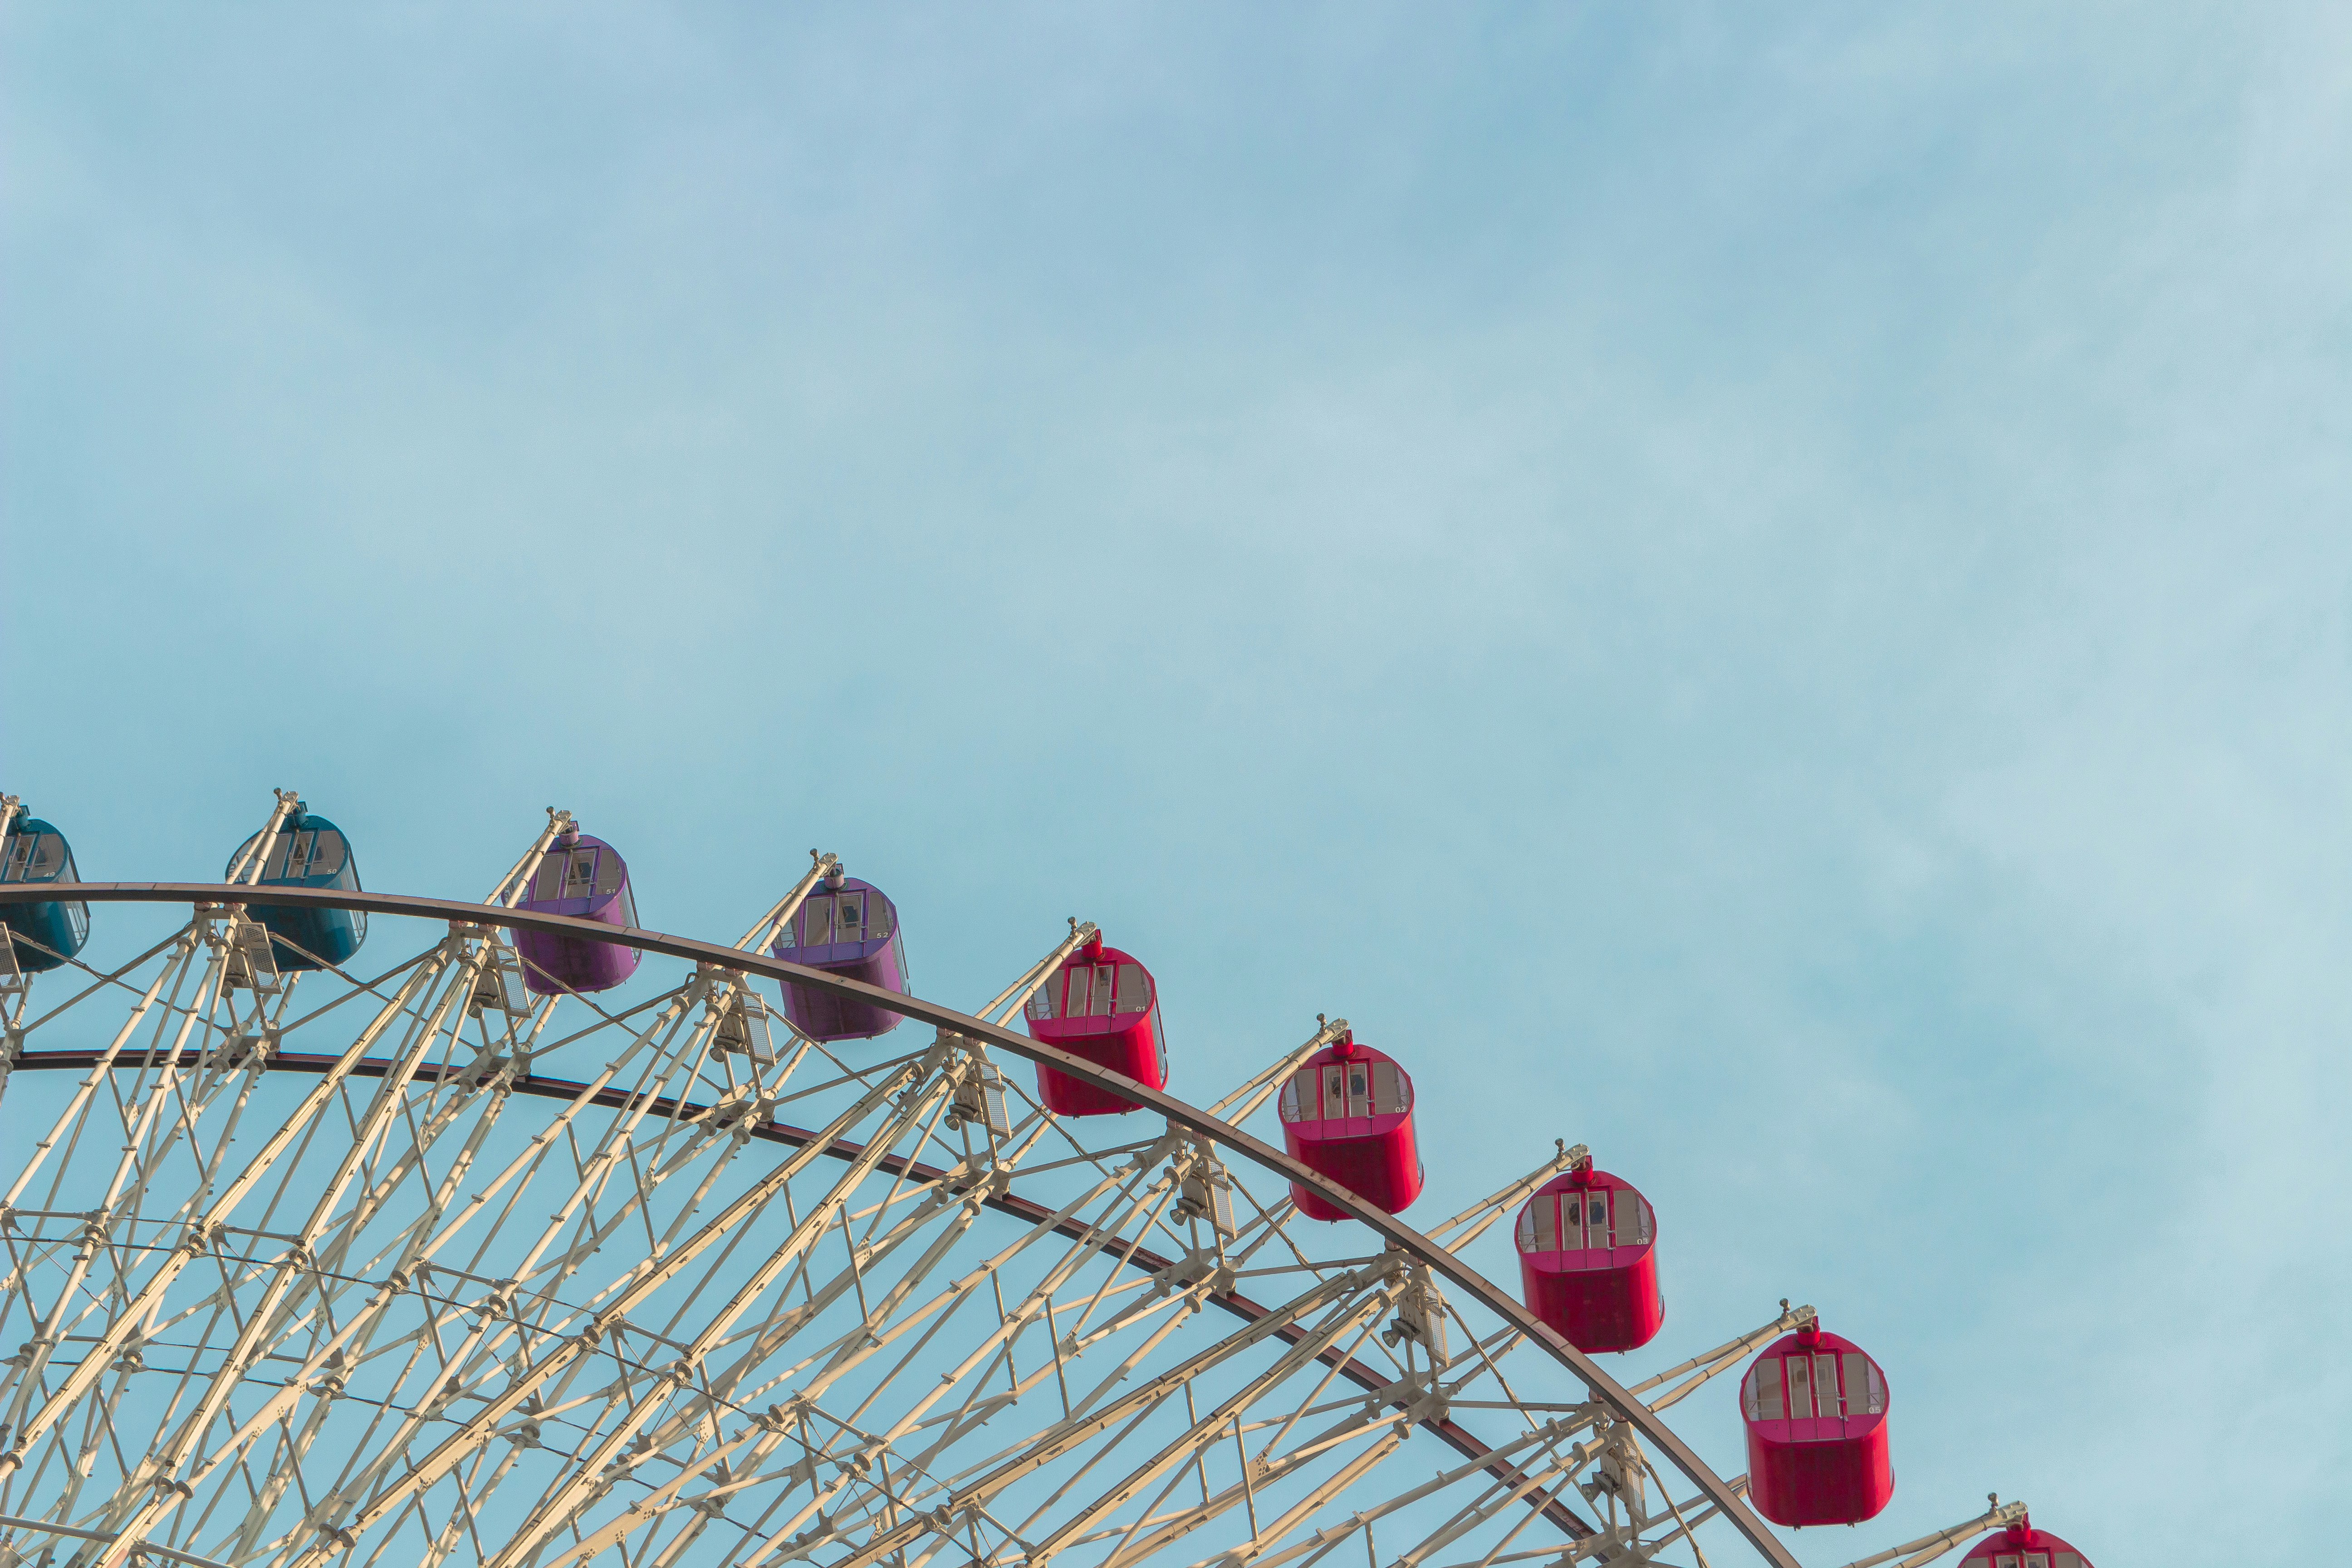 red and white ferris wheel at daytime close-up photography